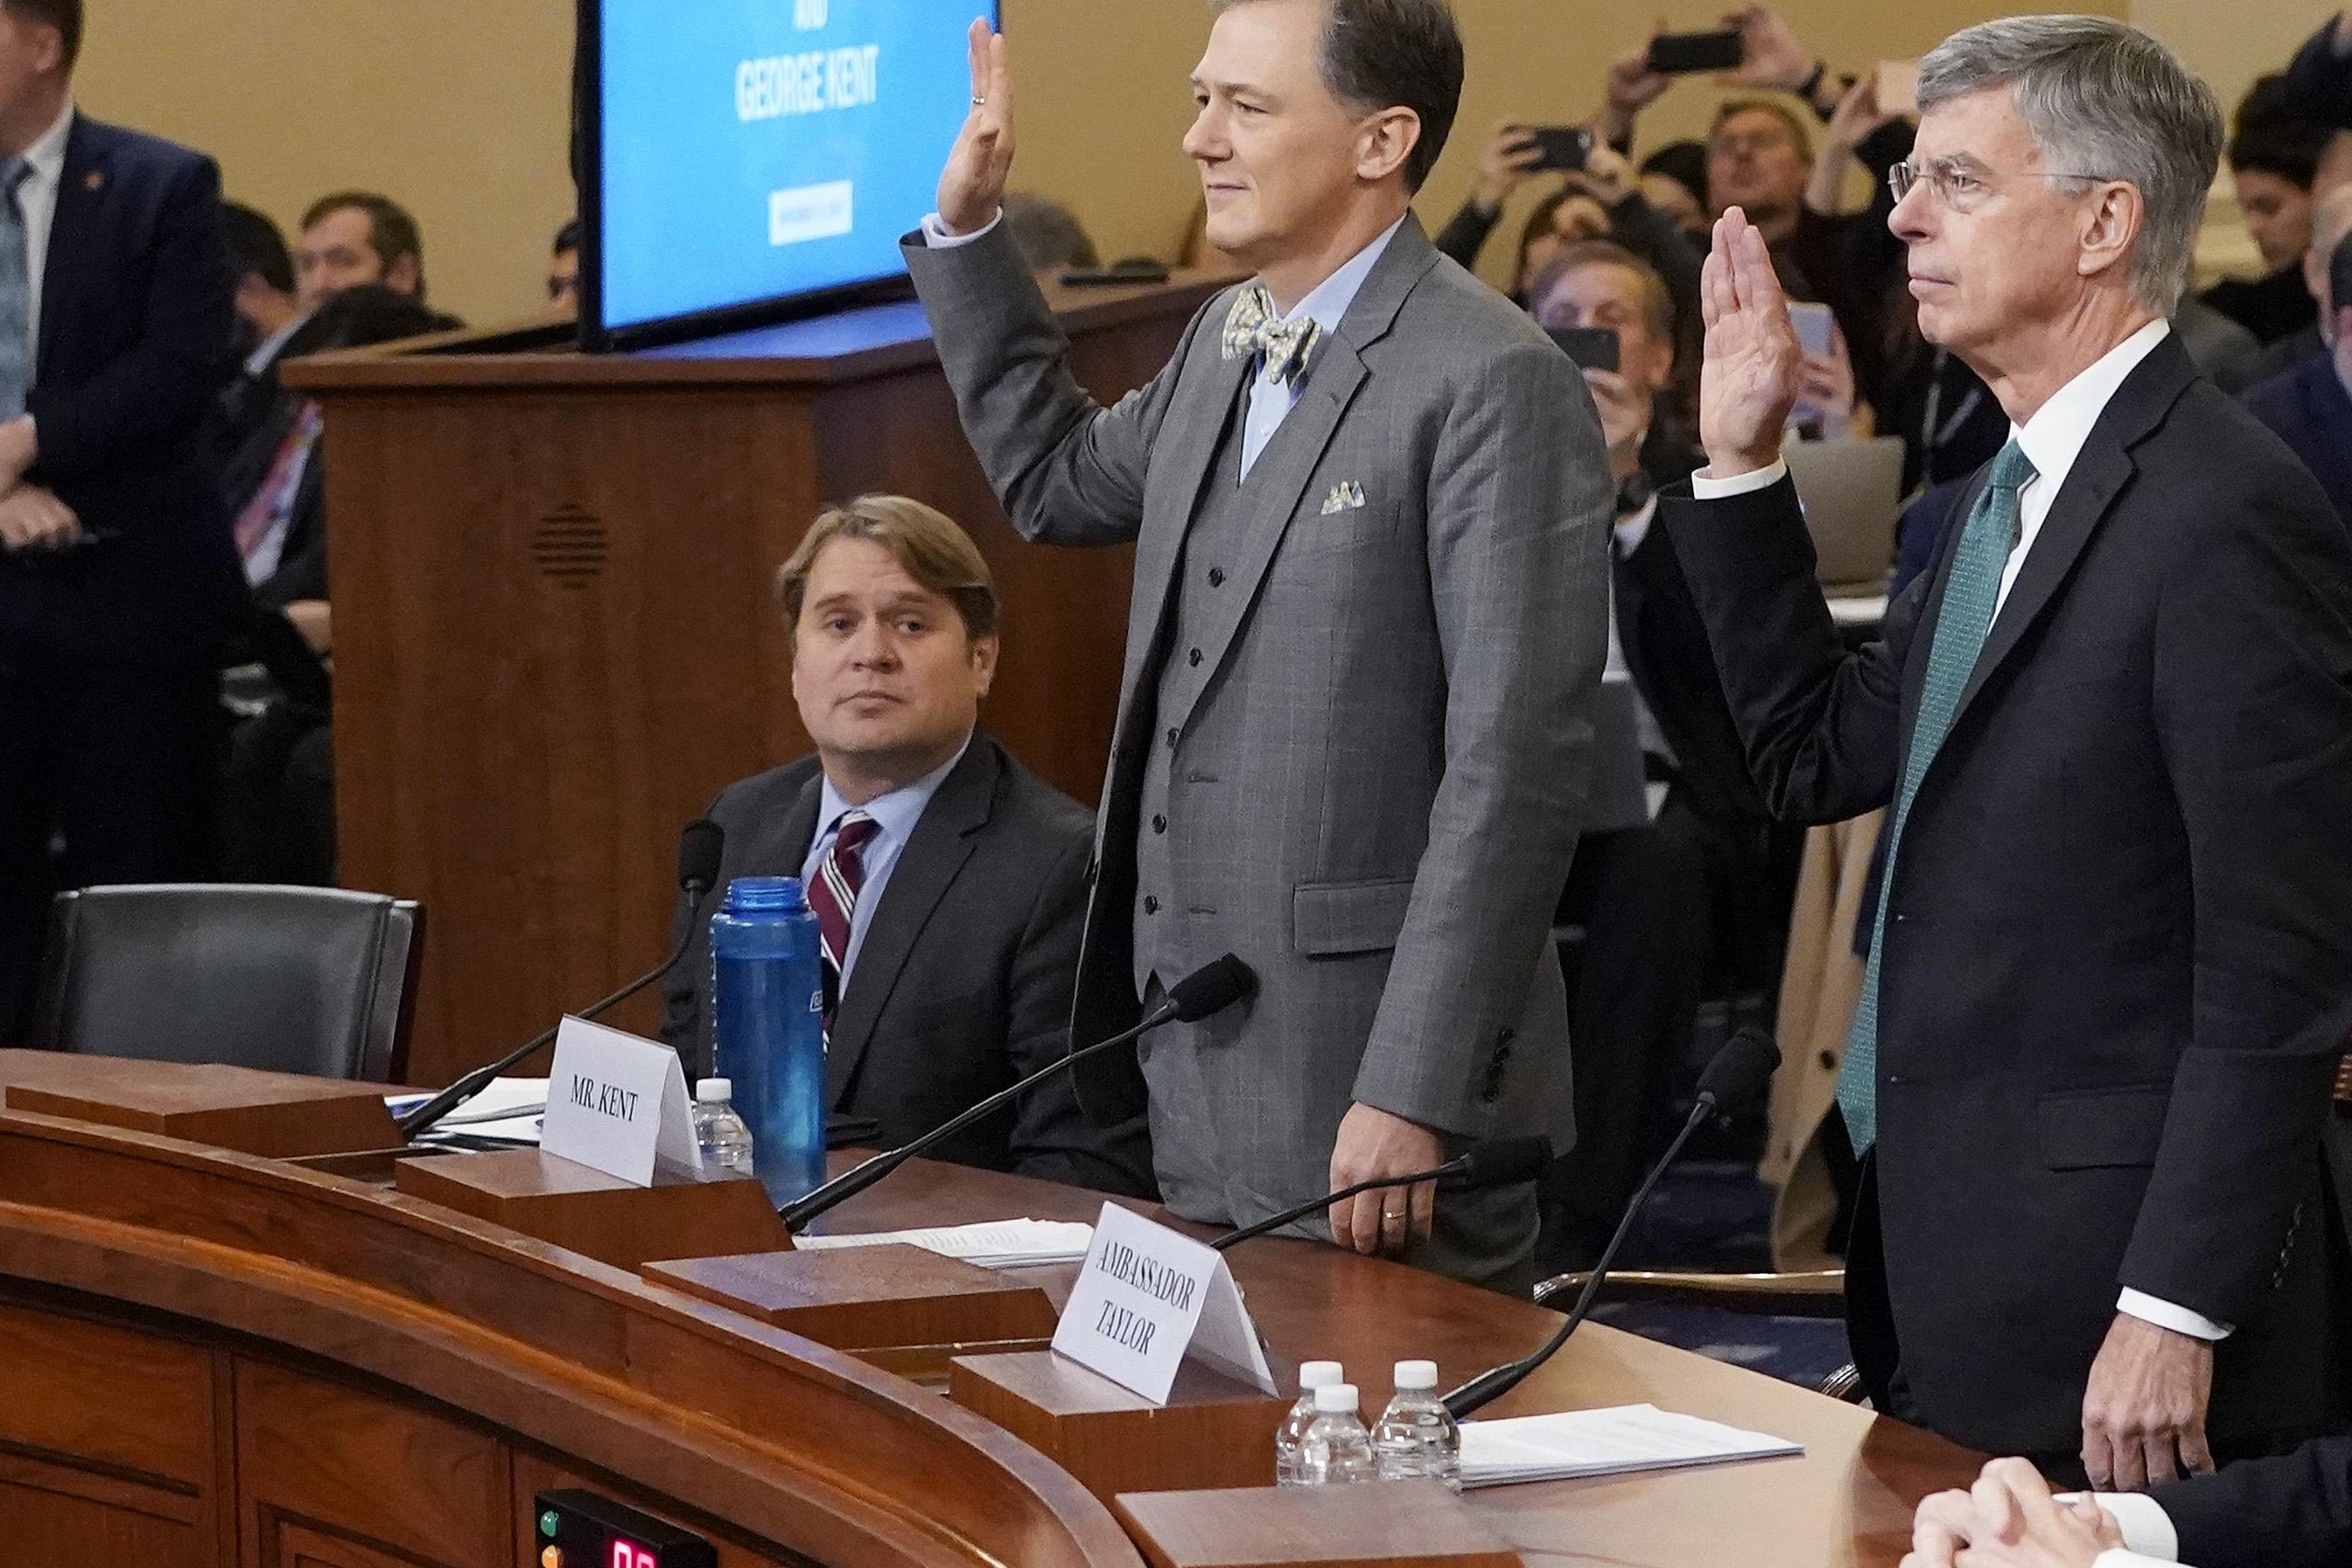 Taylor and Kent raise their hands to be sworn in.